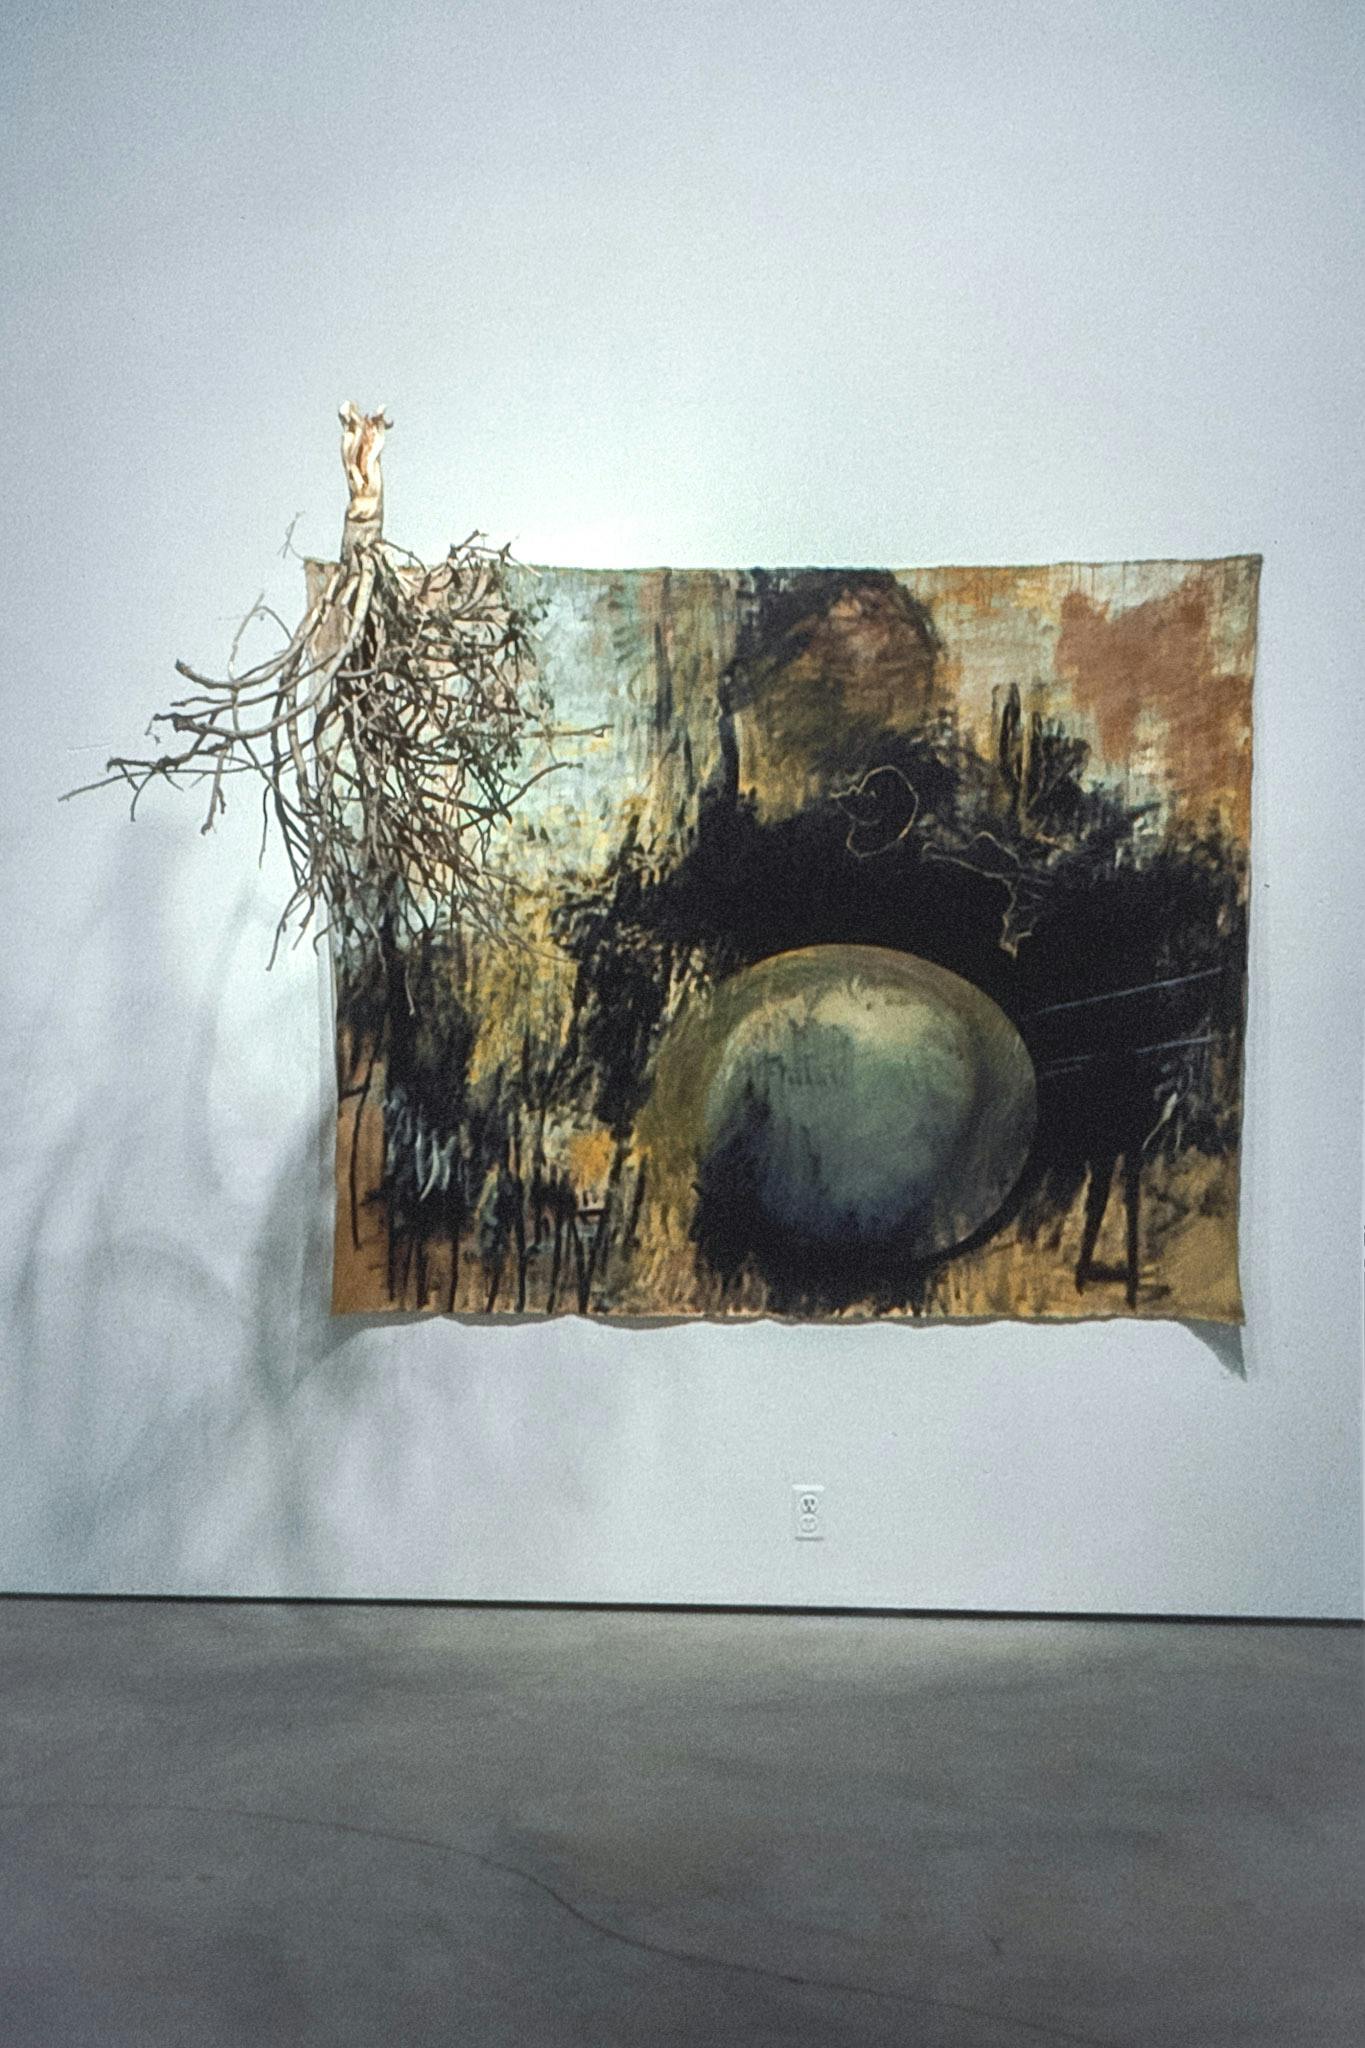 An artwork on a white wall. The work is a painting on fabric pinned to the wall, containing rusty, earthy tones. Extruding from the painting is a large wood branch, possible with tree roots attached.